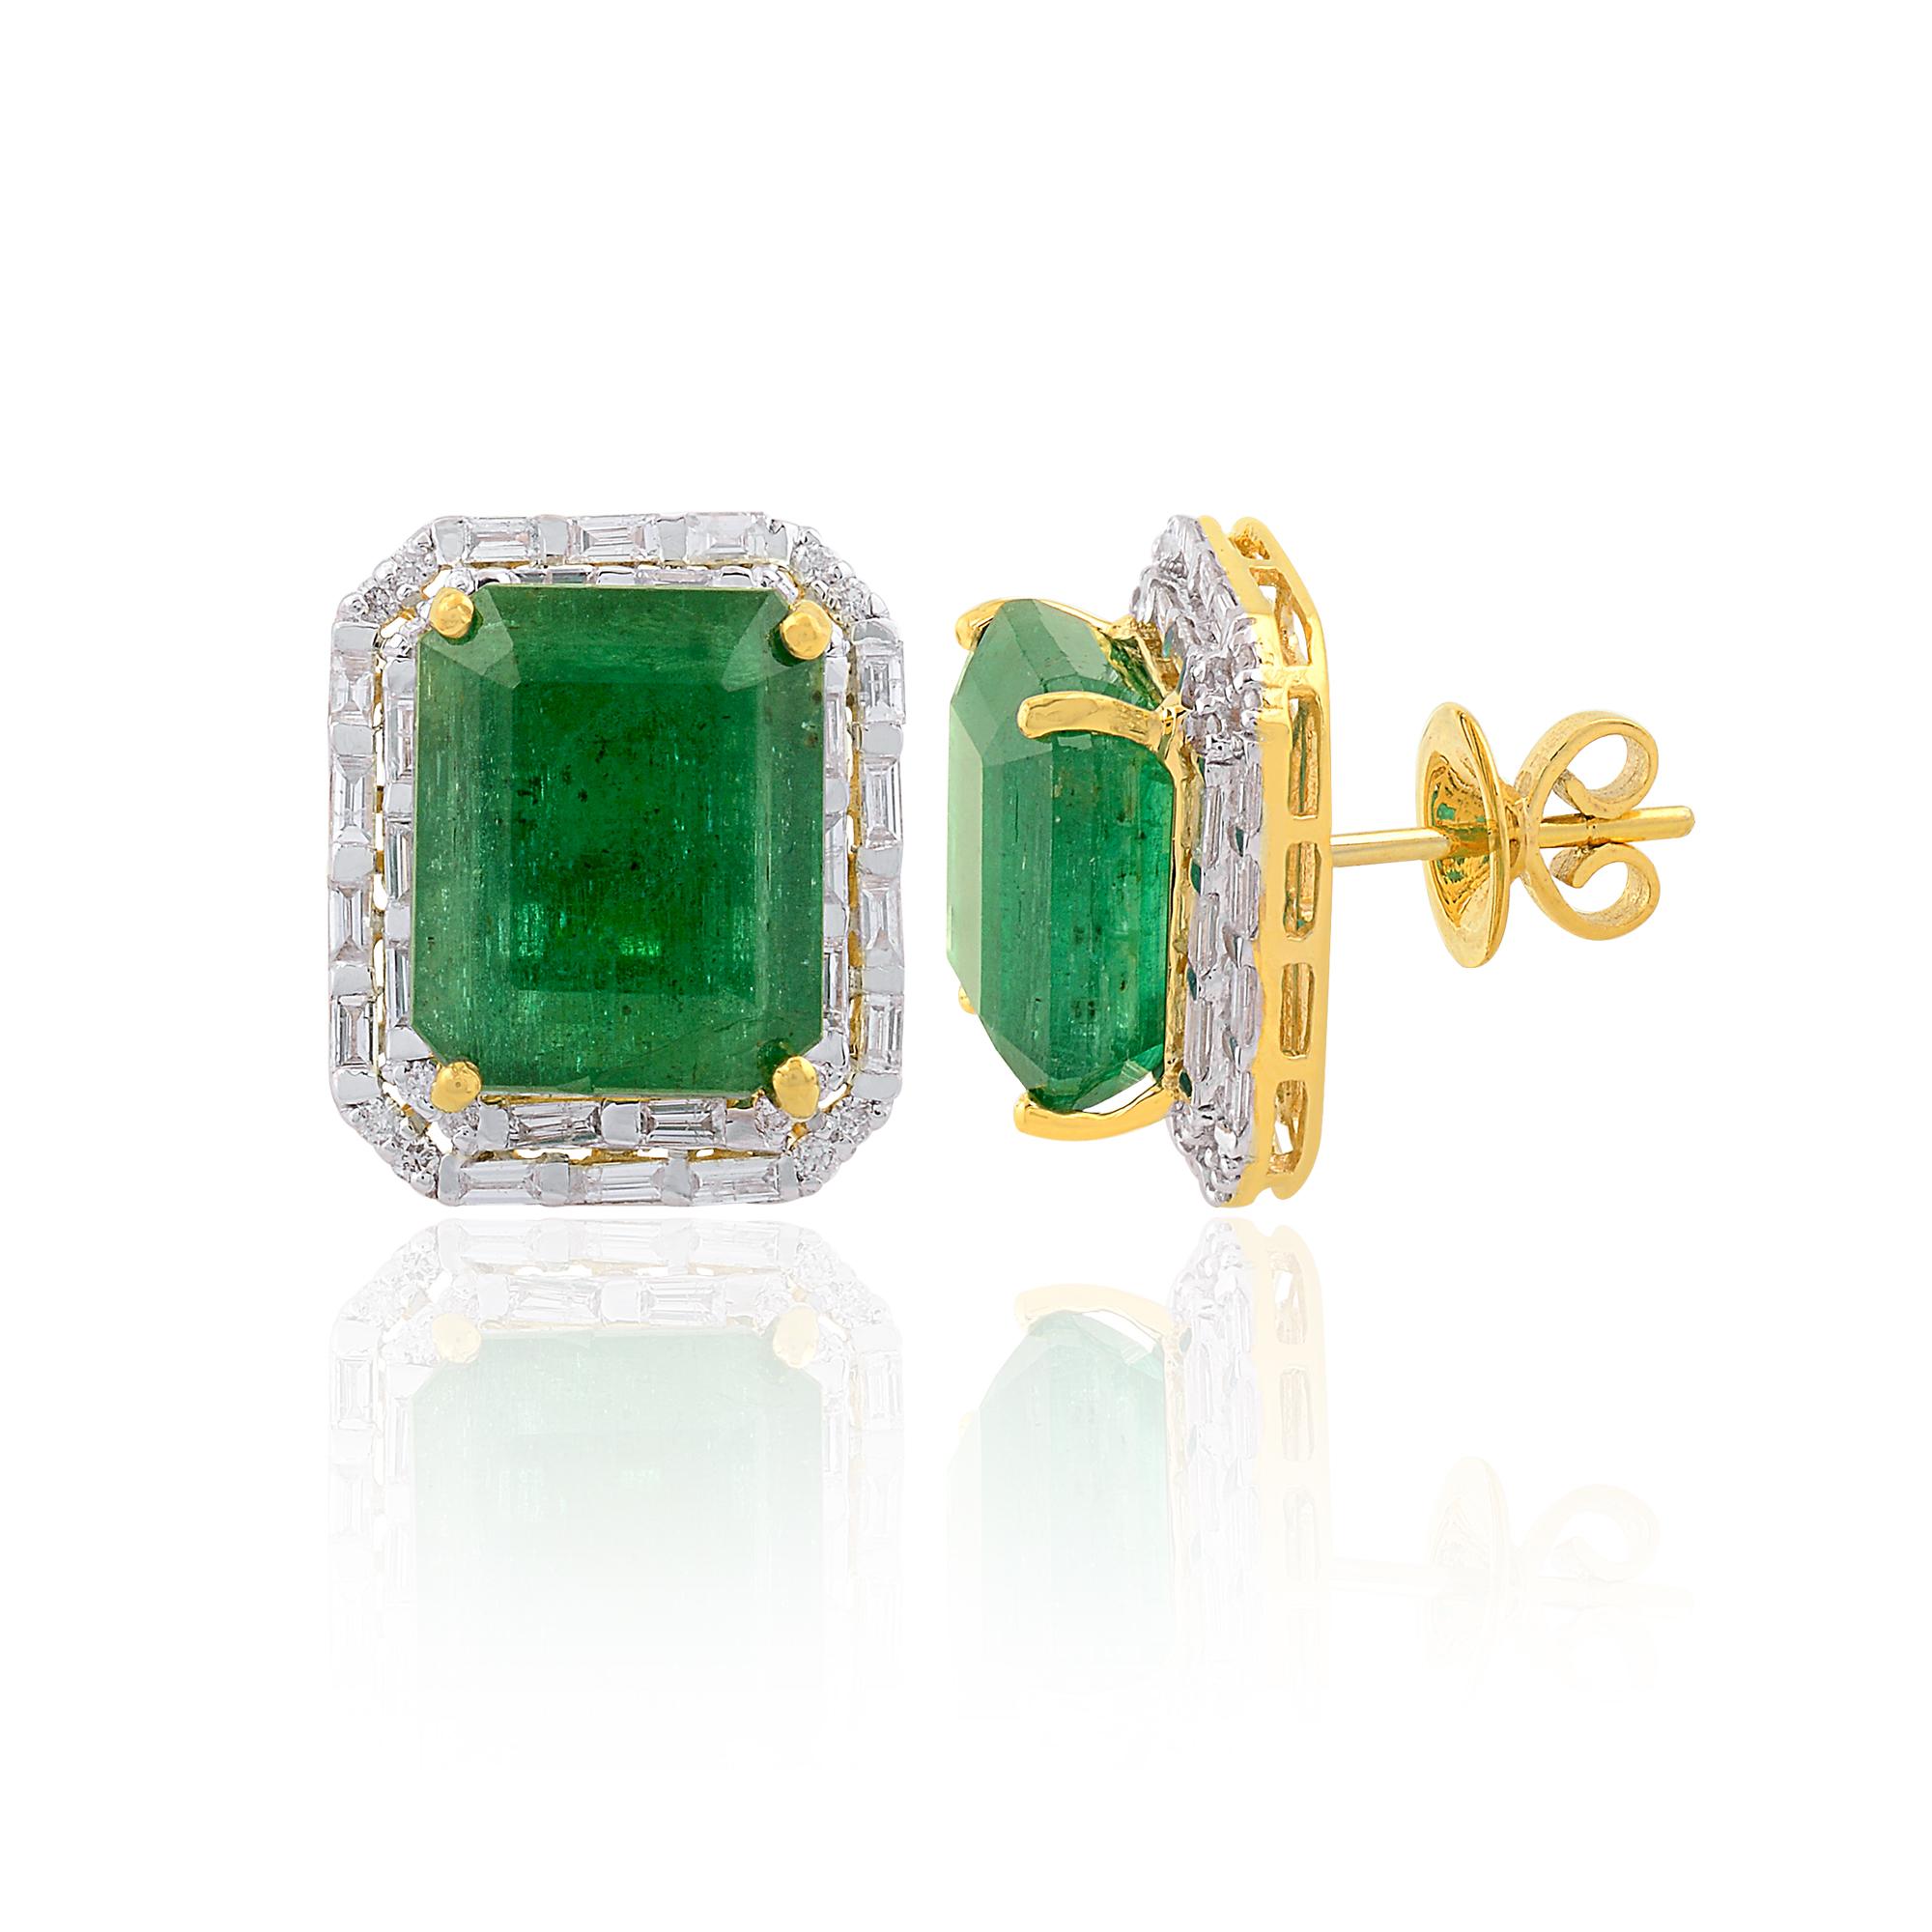 Item Code :- SEE-1458
Gross Wt :- 9.52 gm
18k Yellow Gold Wt :- 6.88 gm
Natural Diamond Wt :- 1.20 Ct.  ( AVERAGE DIAMOND CLARITY SI1-SI2 & COLOR H-I )
Emerald Wt :- 12.02 Ct
Earrings Size :- 14x17 mm approx.

✦ Sizing
.....................
We can